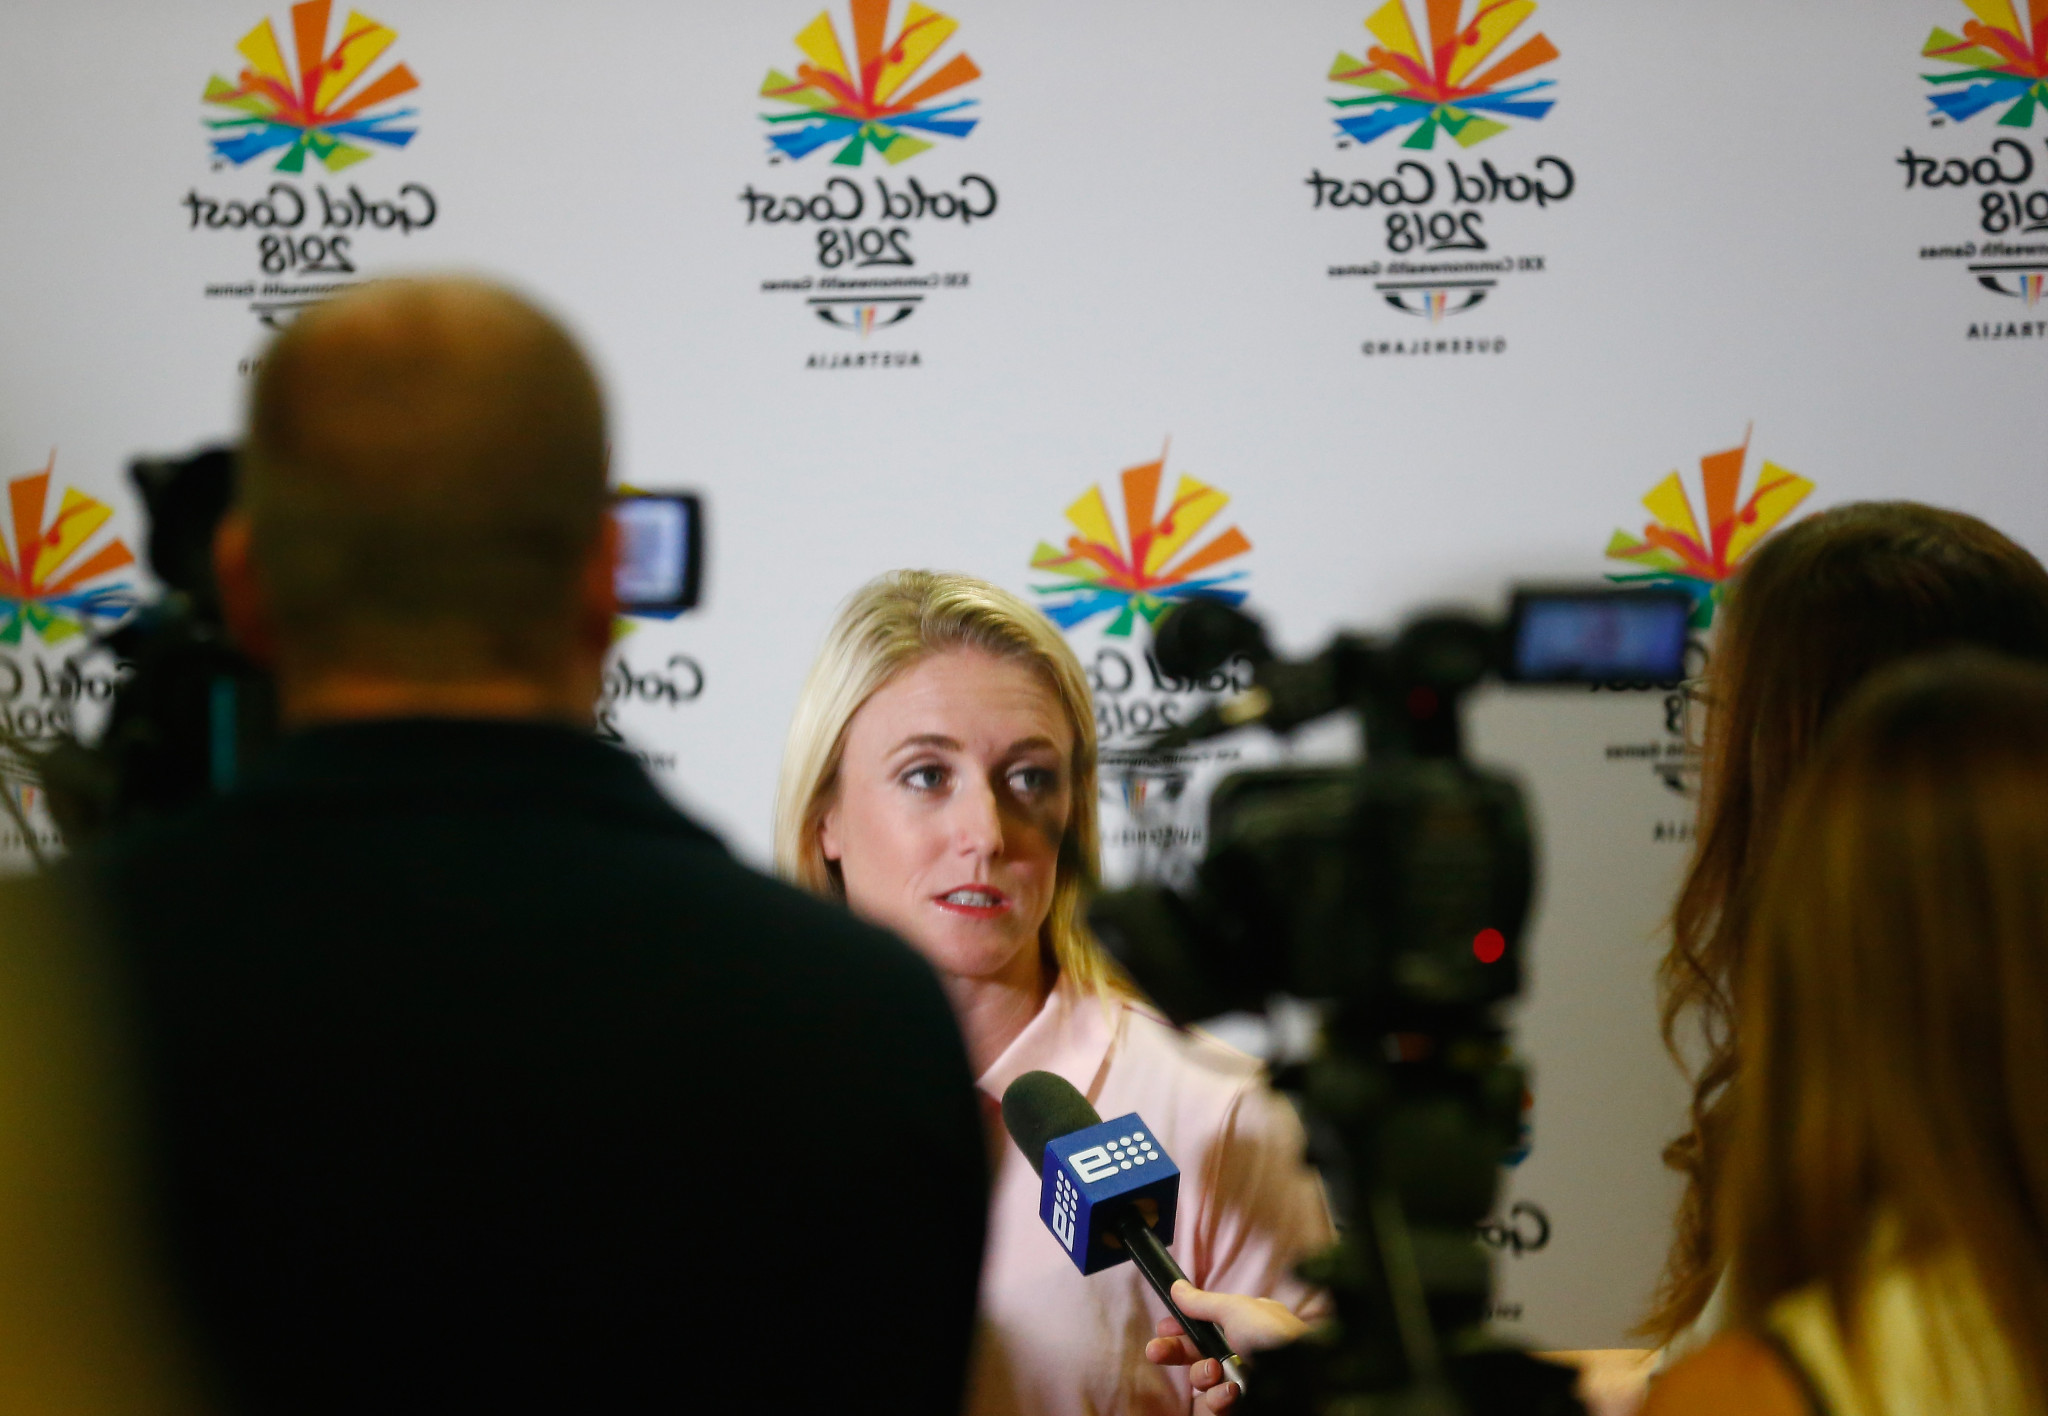 Gold Coast 2018 remind media of news access rules prior to Commonwealth Games